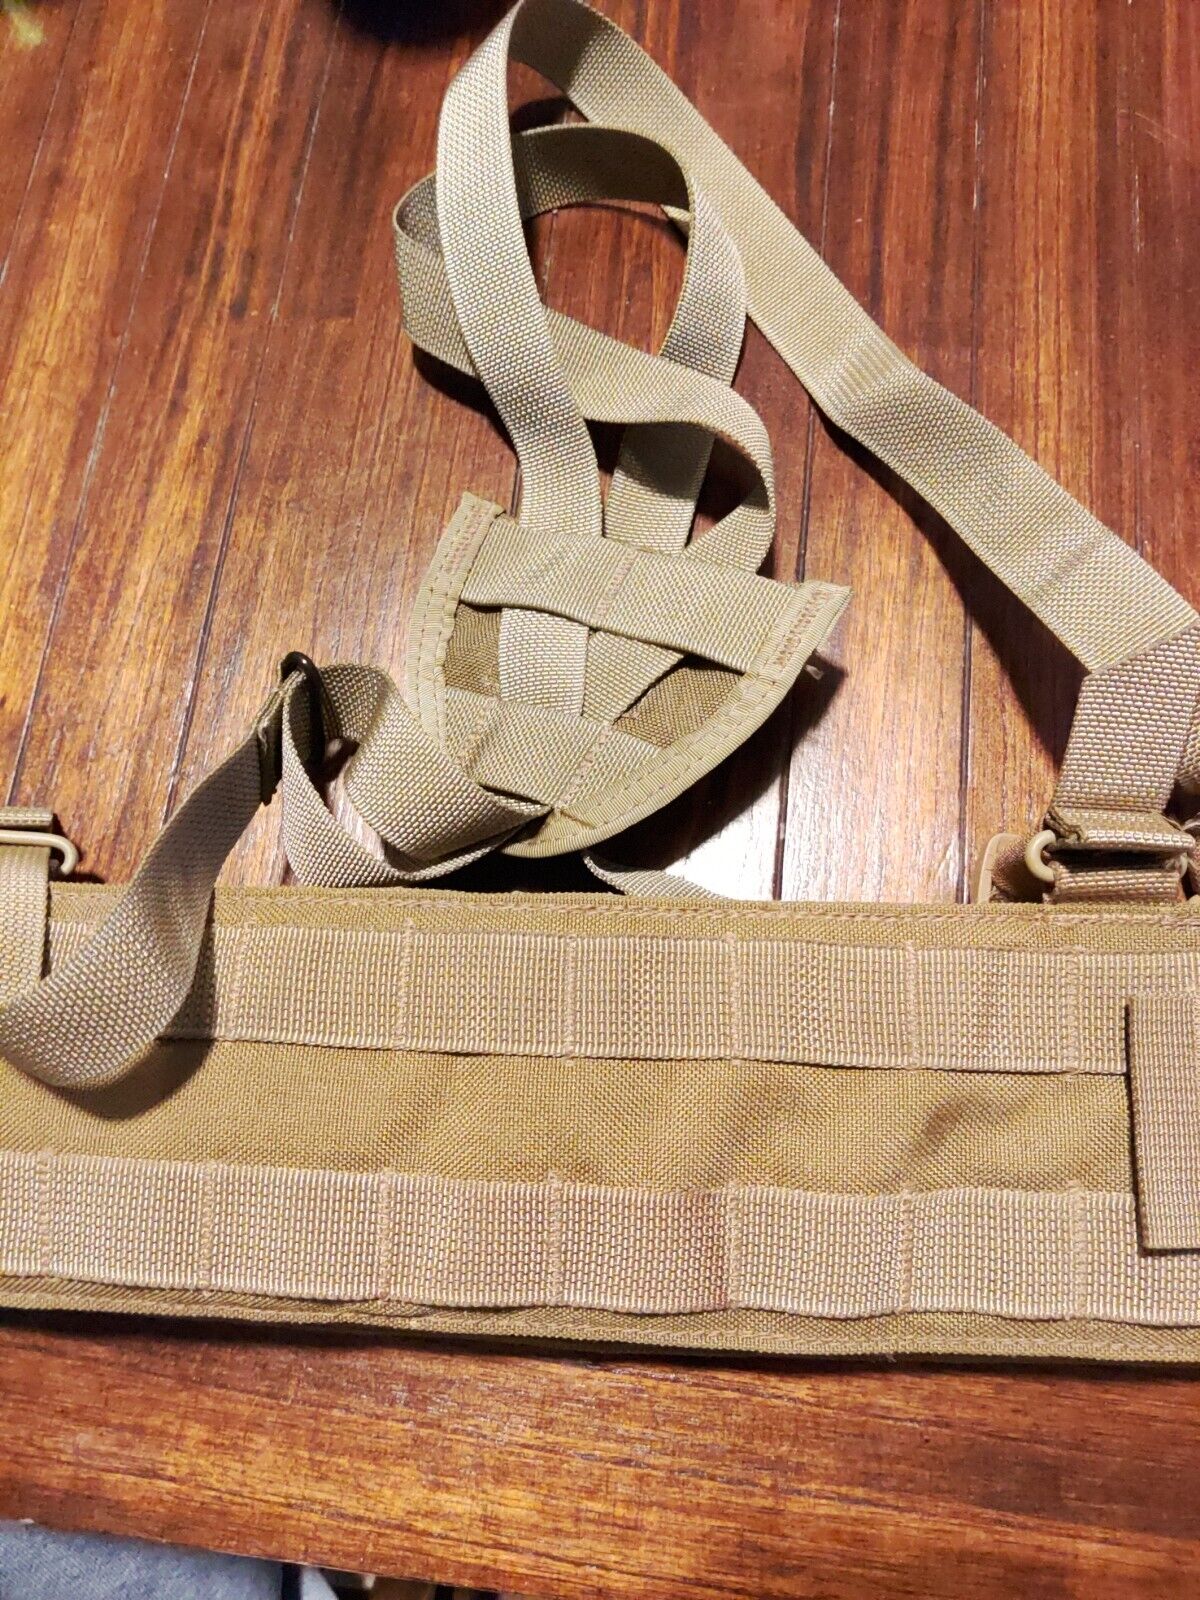 eagle industries padded war belt With Suspenders 